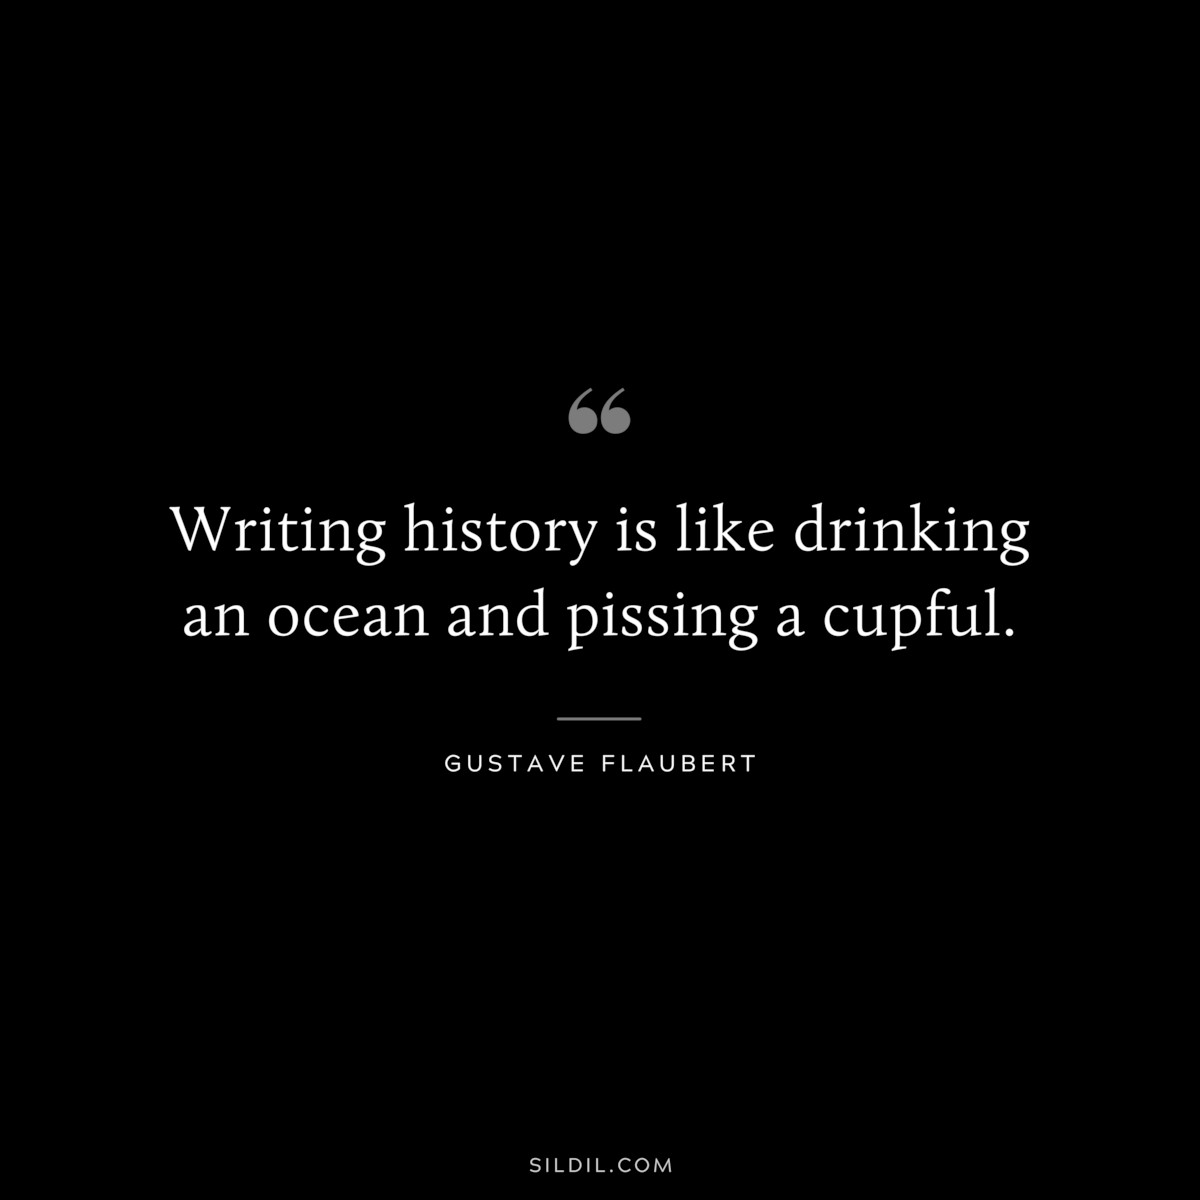 Writing history is like drinking an ocean and pissing a cupful. ― Gustave Flaubert